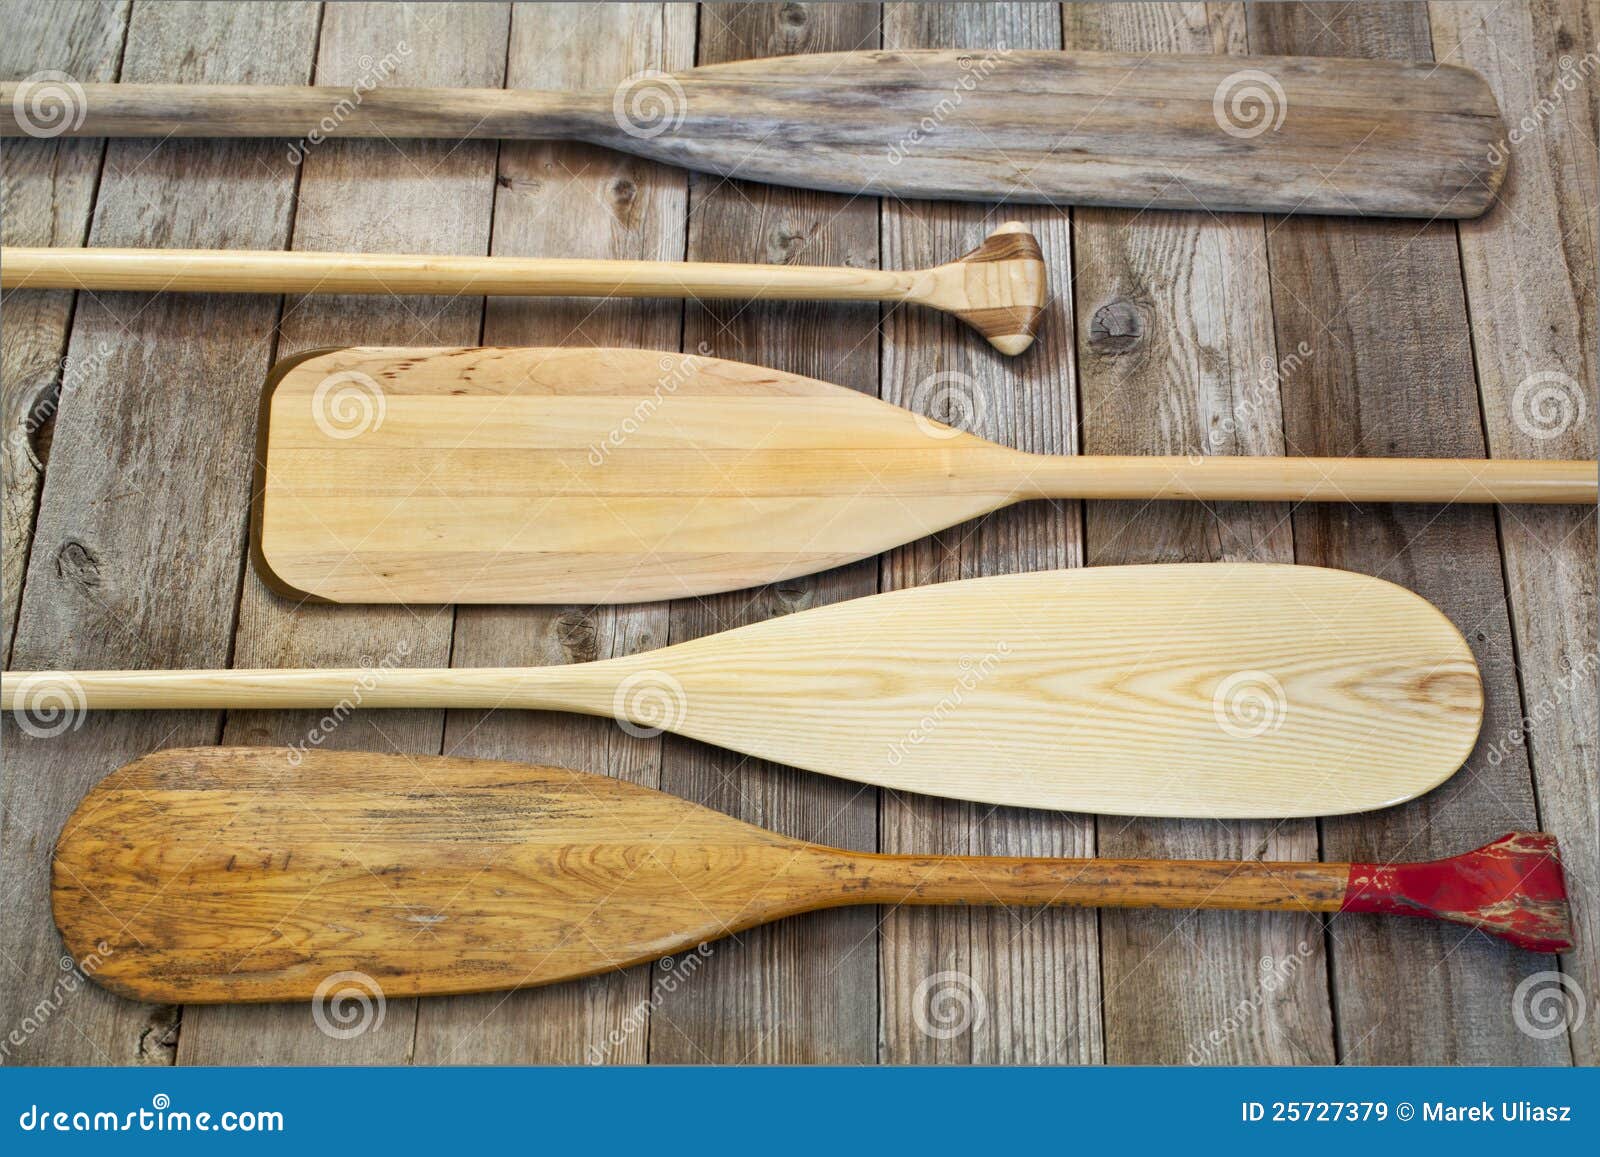 Blades and grips of wooden canoe paddles of different shape against 